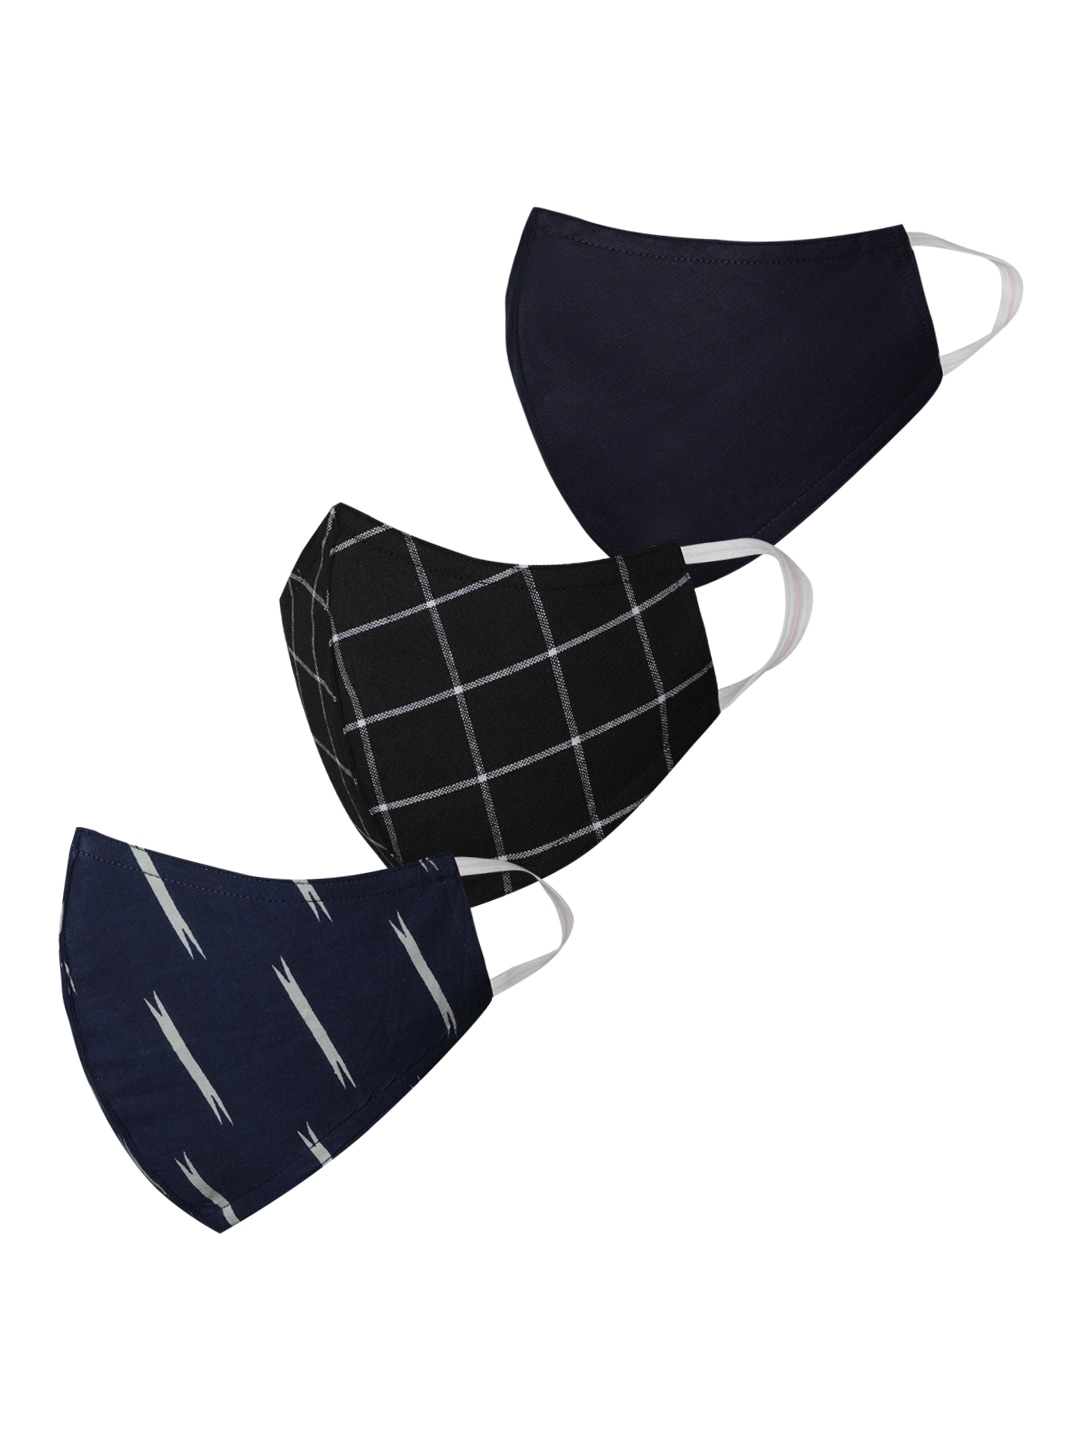 VASTRAMAY Adults Black & Navy Blue Pack of 3 Reusable 3-Layer Outdoor Masks Price in India